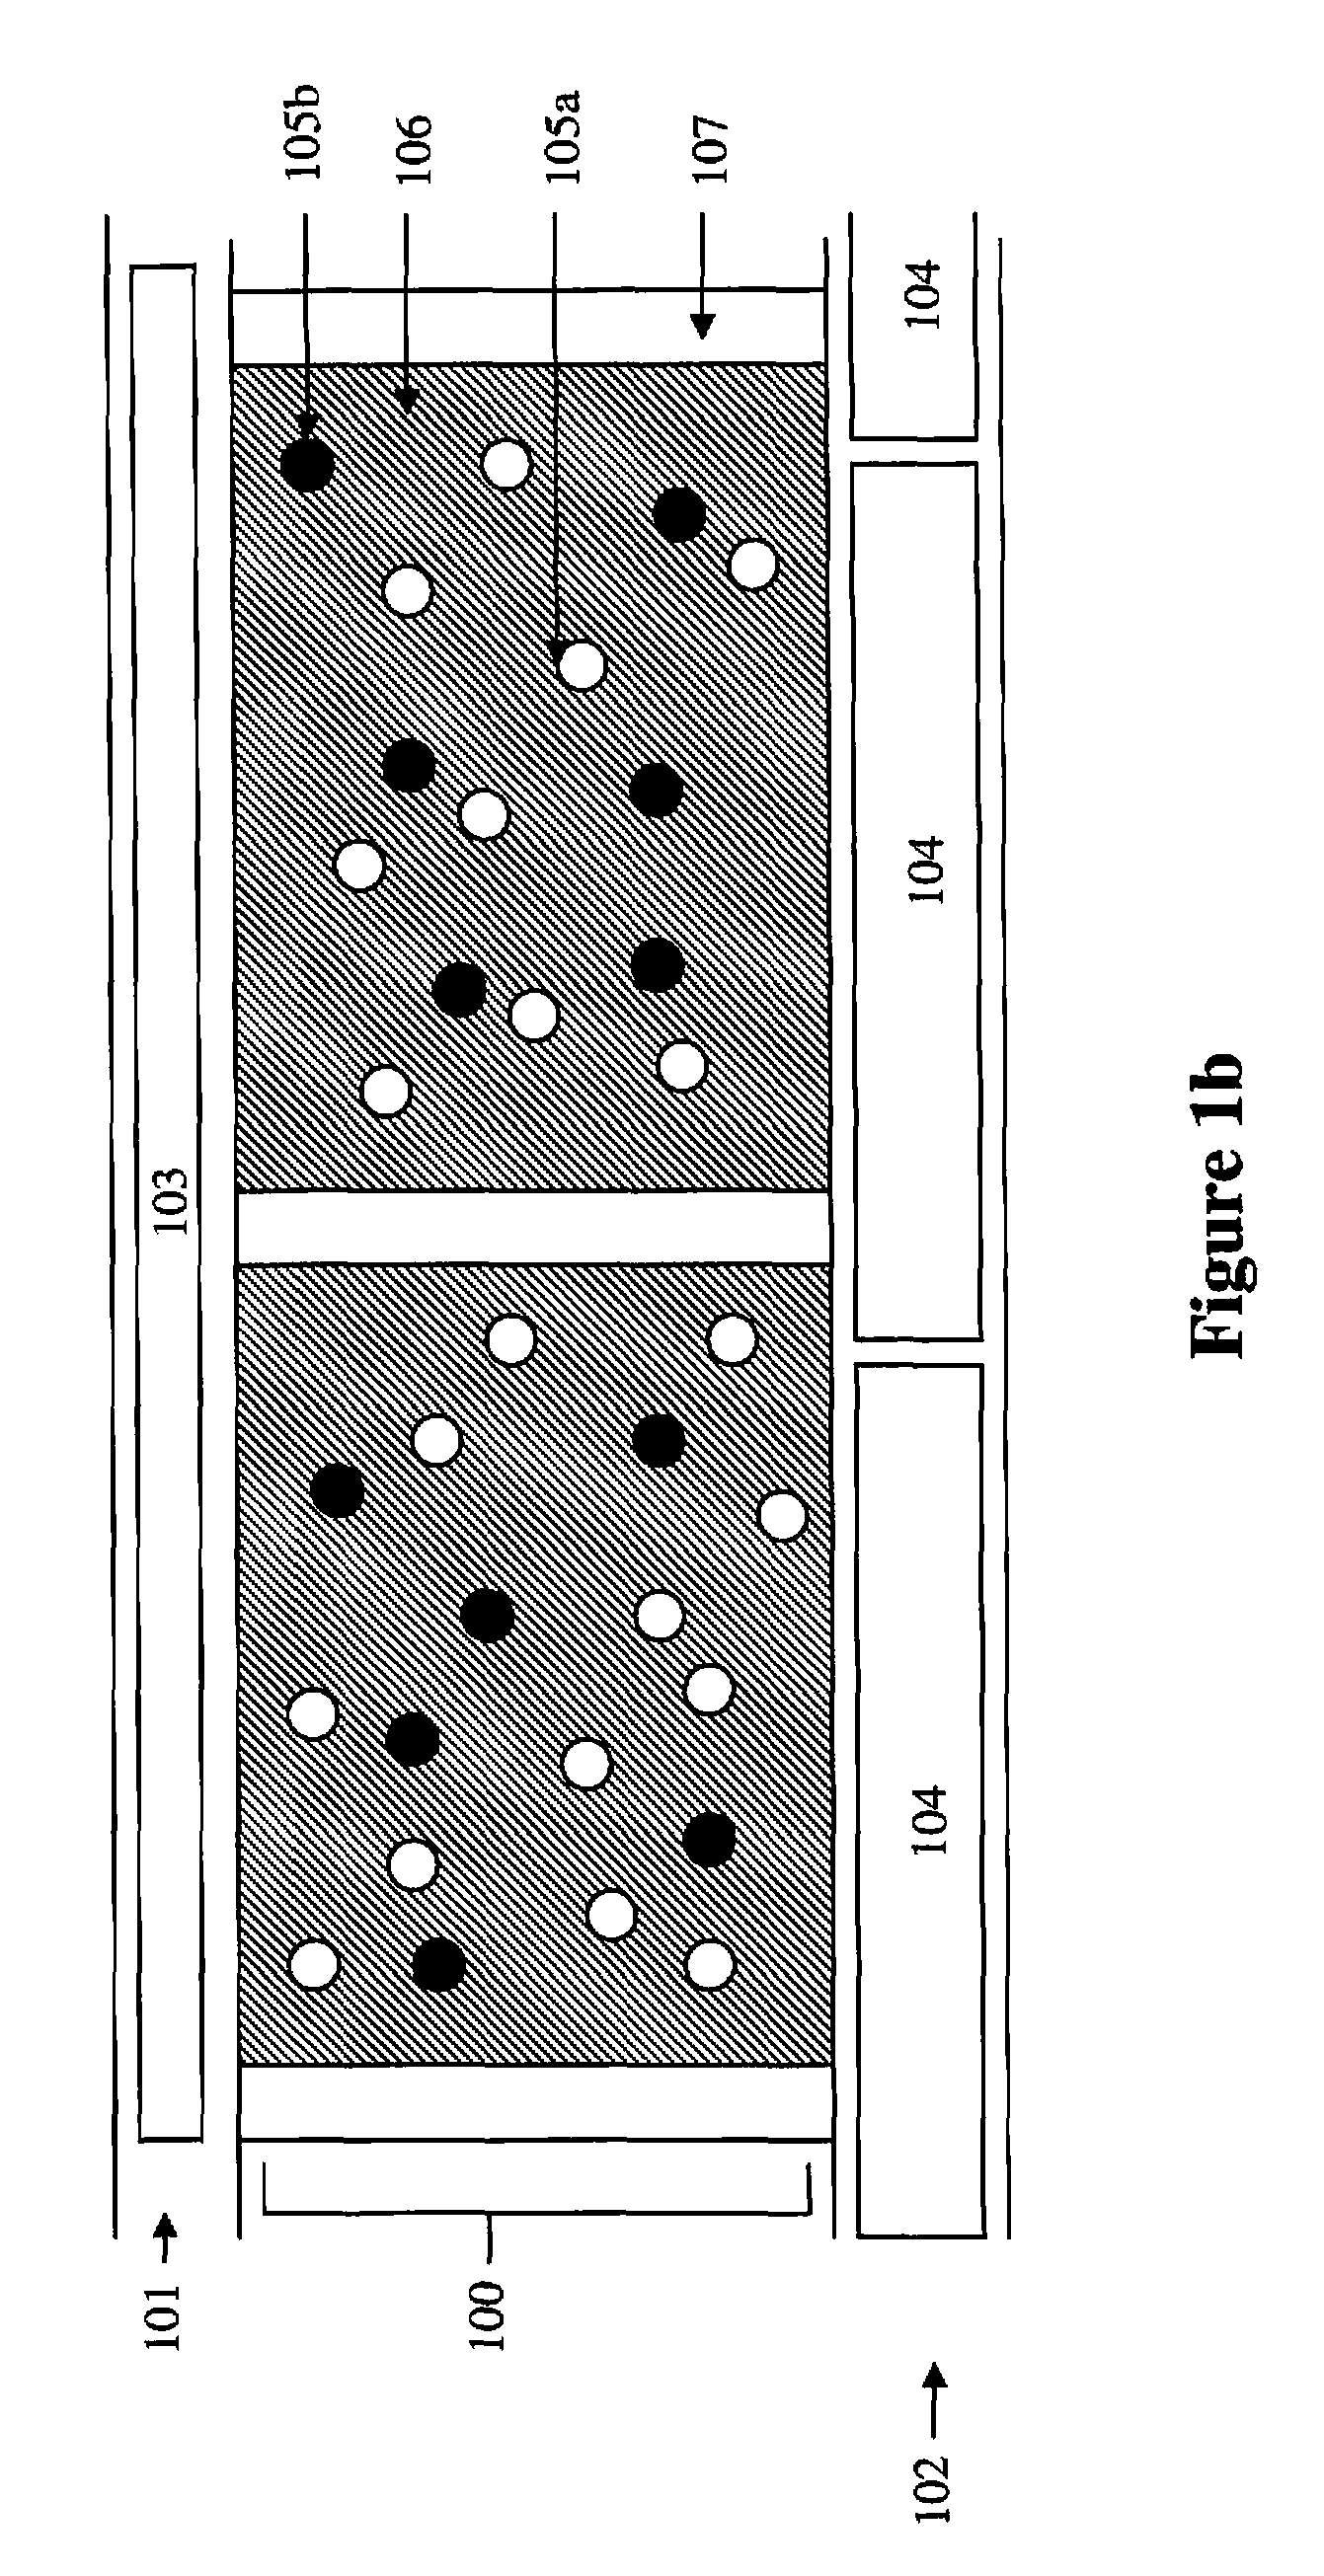 Color display architecture and driving methods